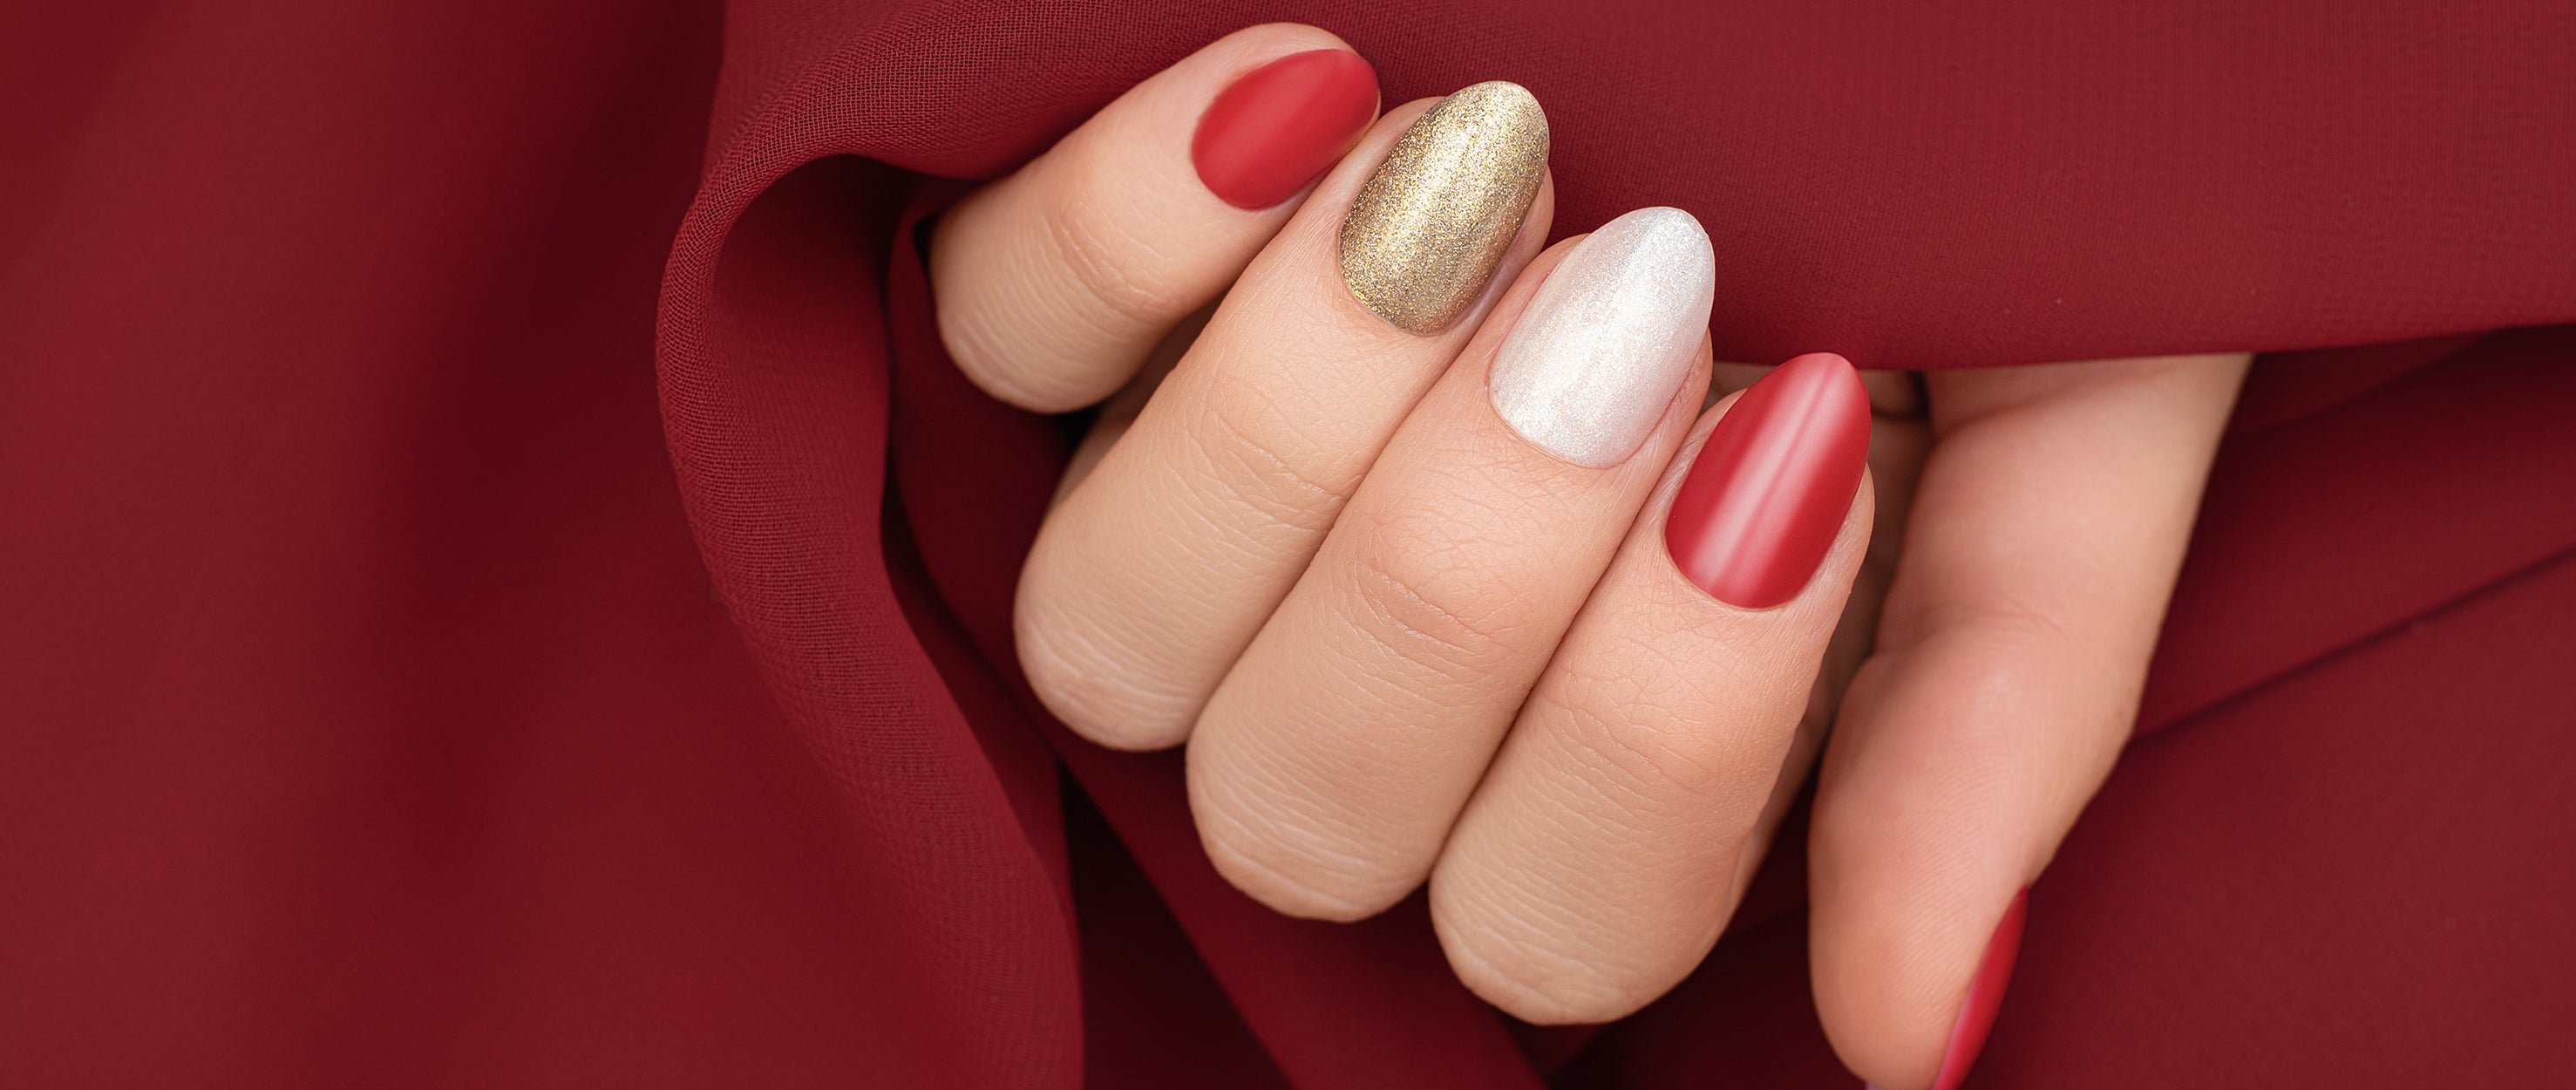 15 Easy Nail Art Designs You Can